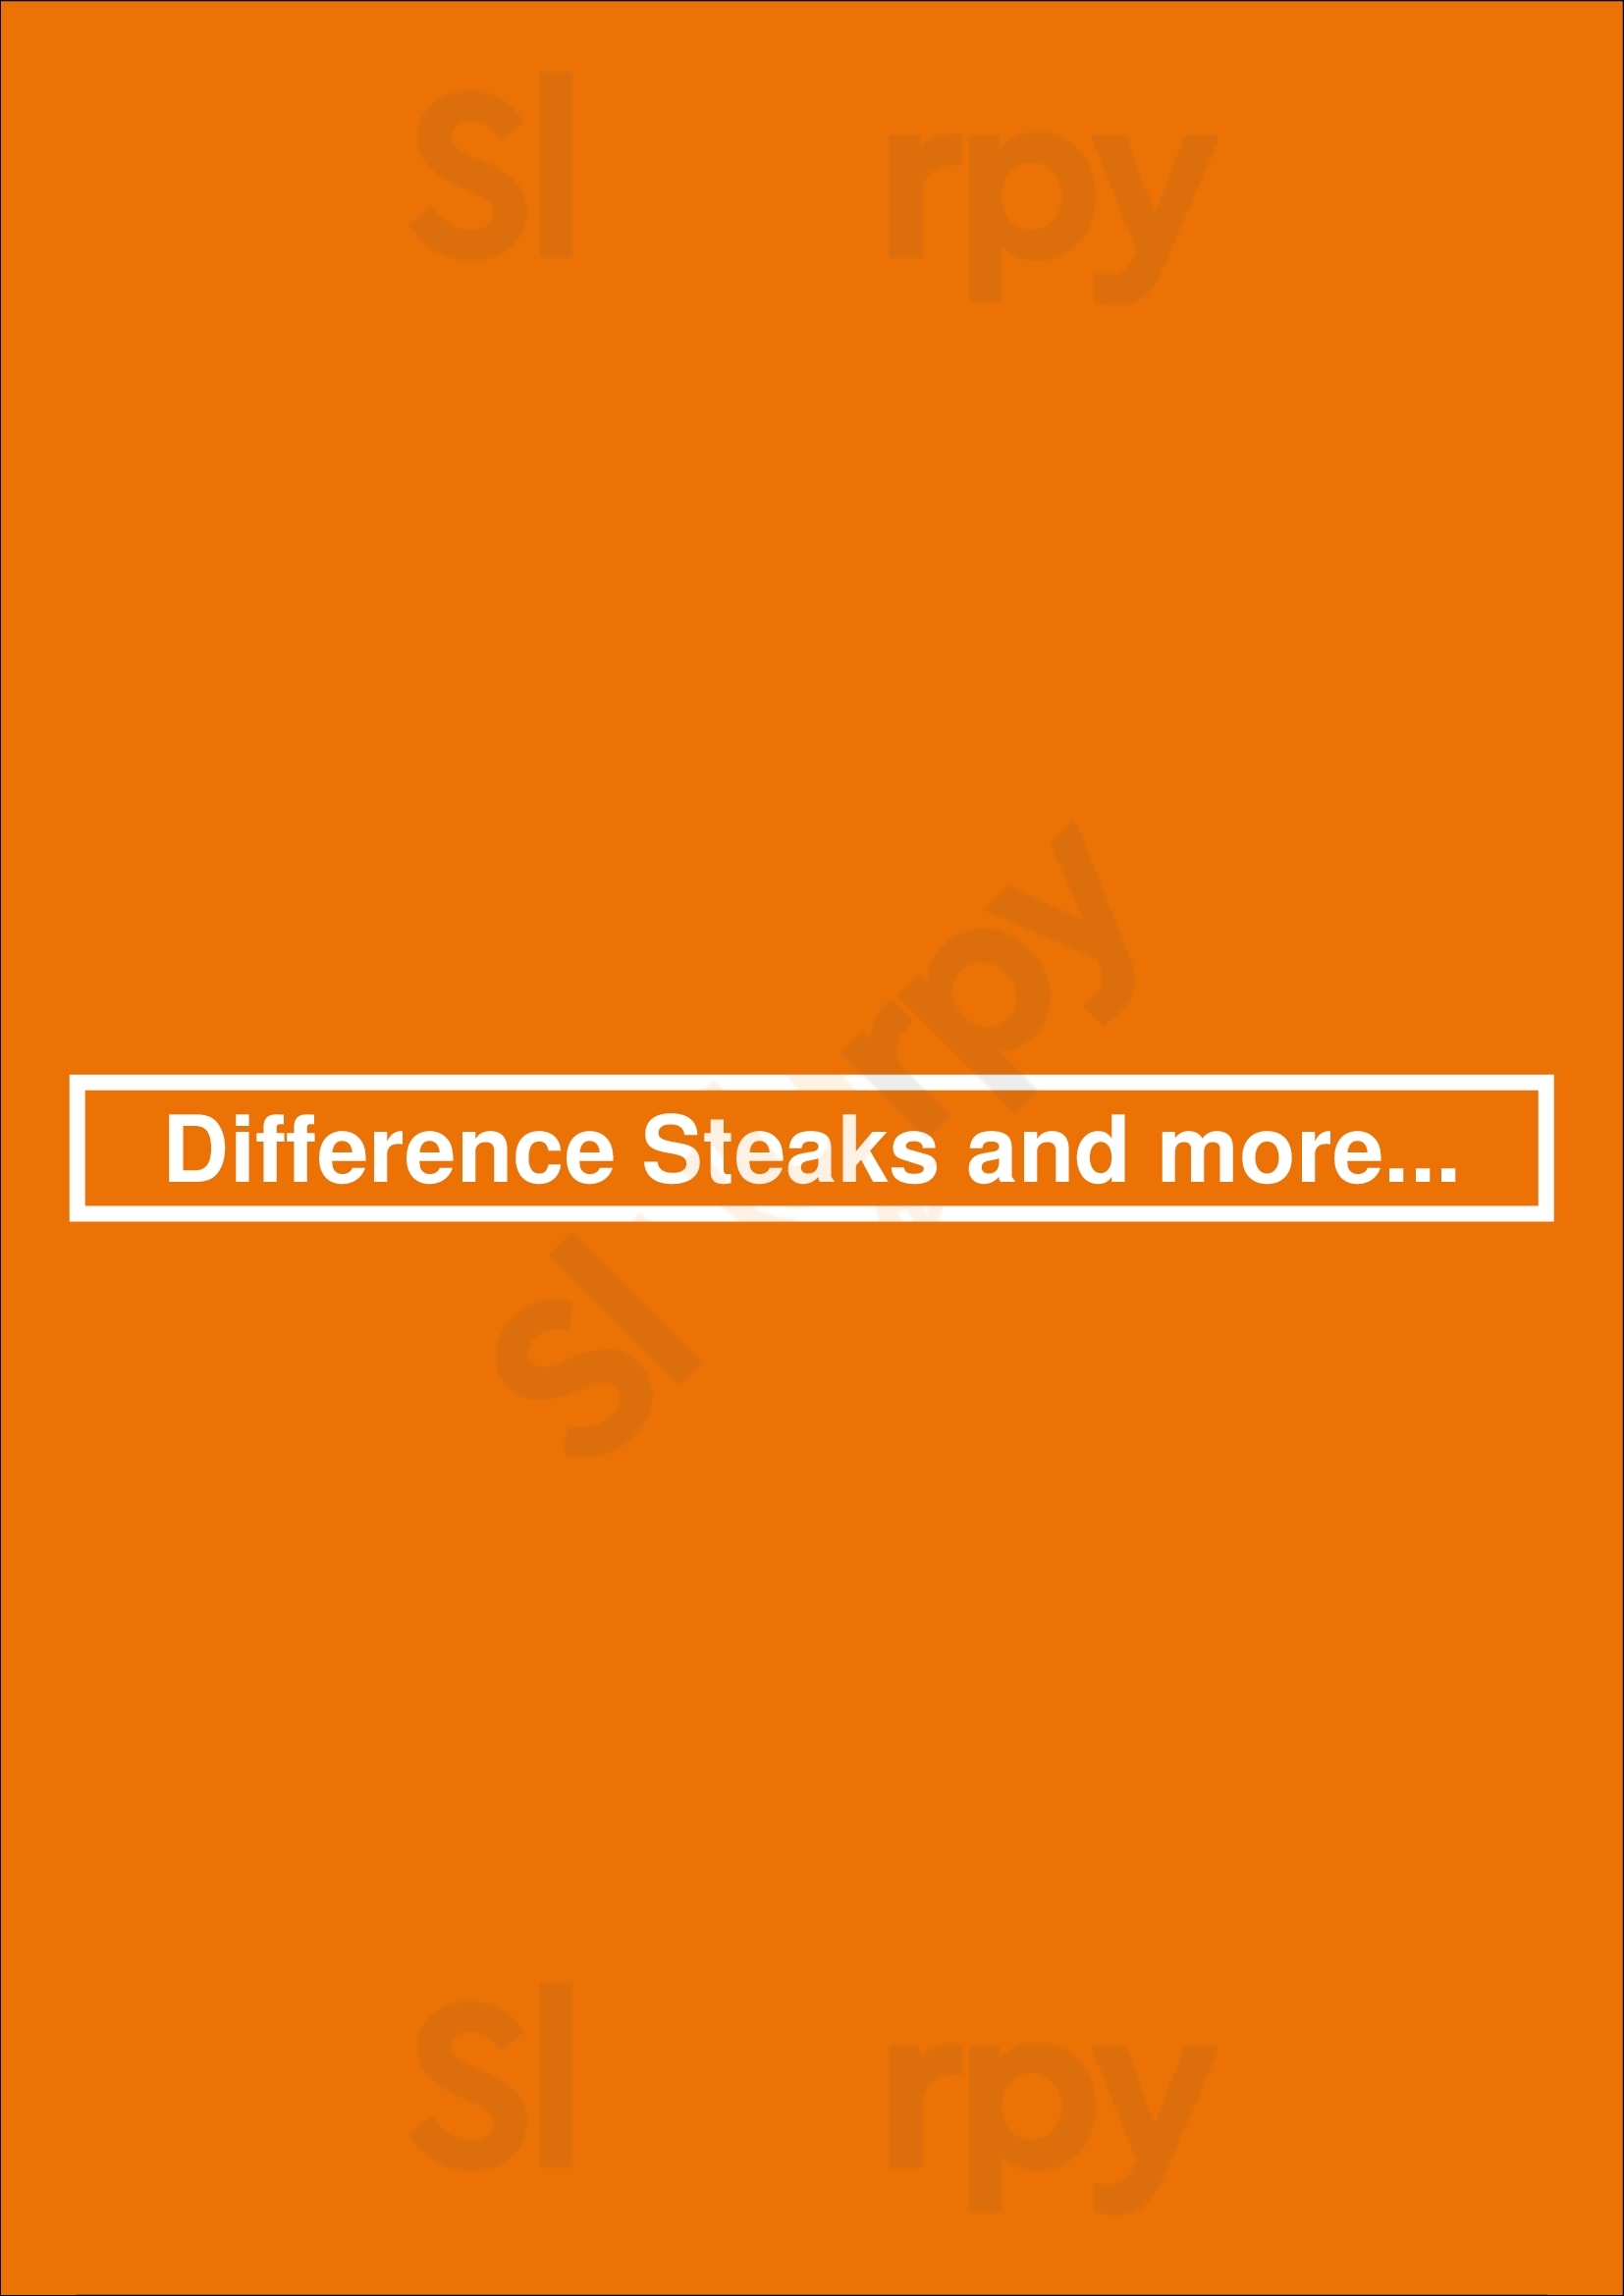 Difference Steaks And More... Wijchen Menu - 1